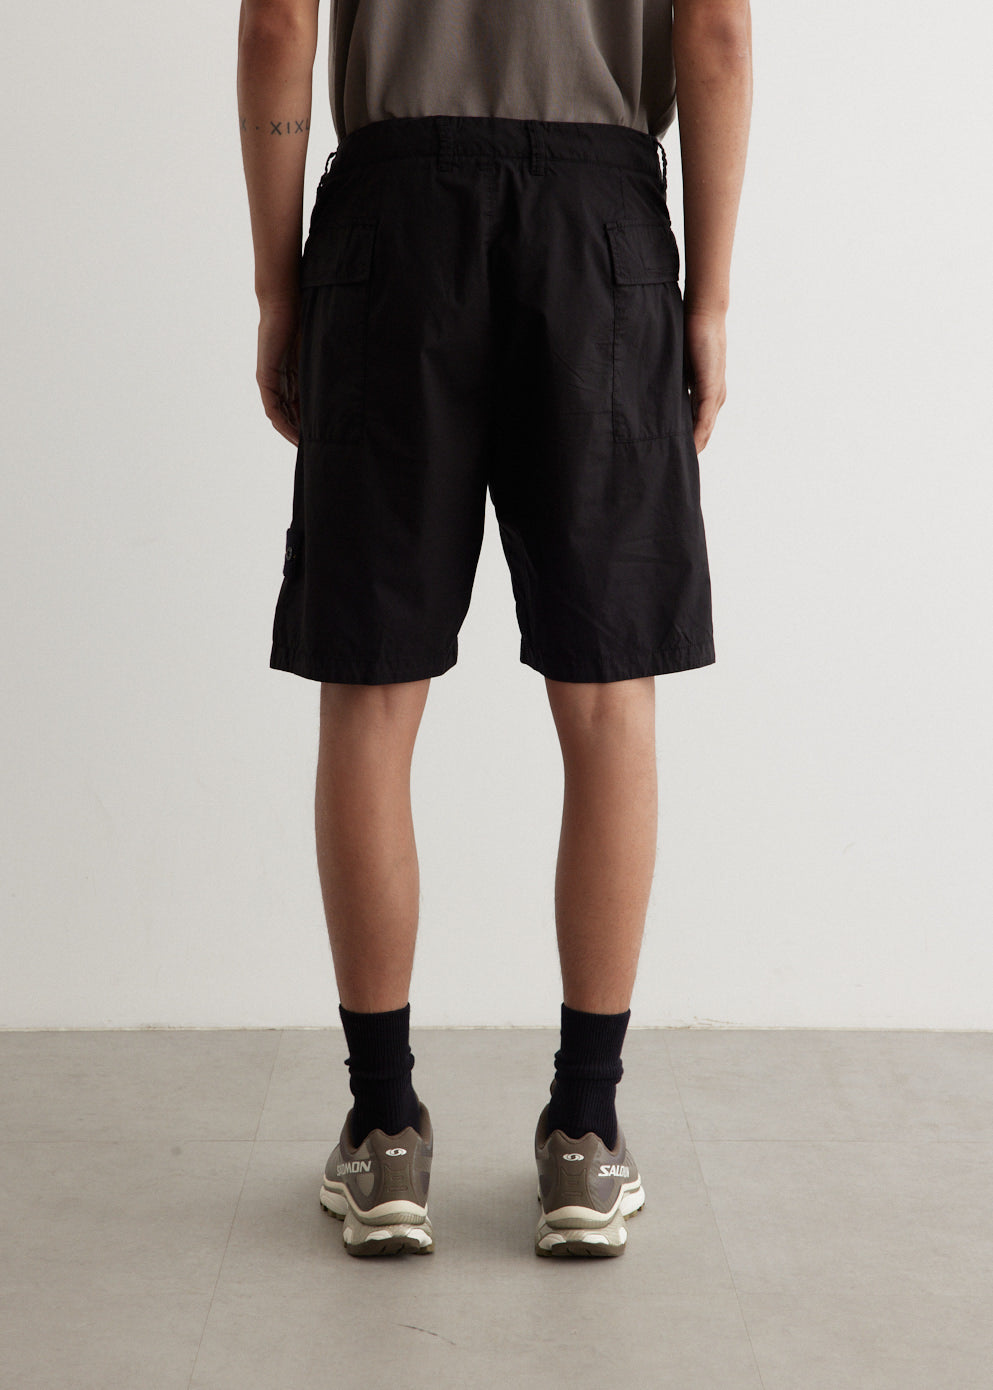 Garment Dyed Cotton Relaxed Bermuda Shorts